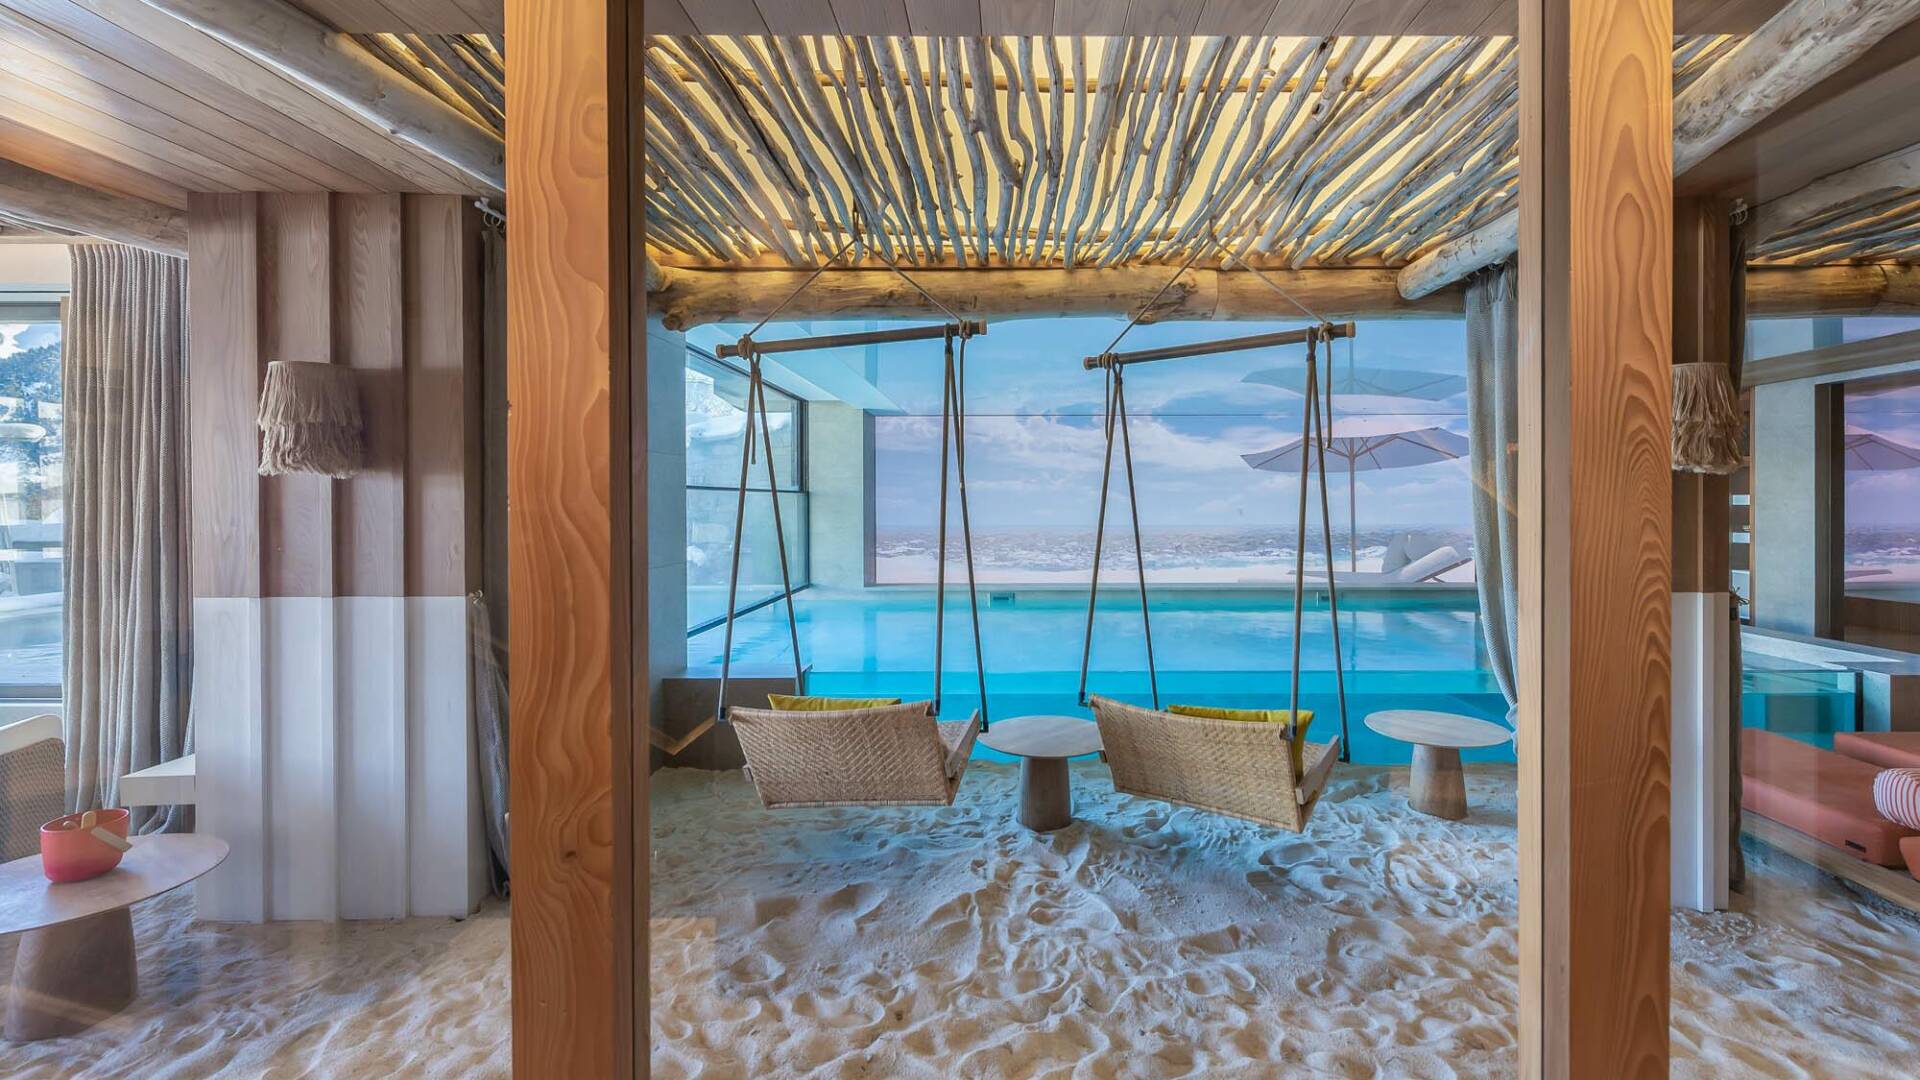 luxury indoor/outdoor heated pool with swings and white sand